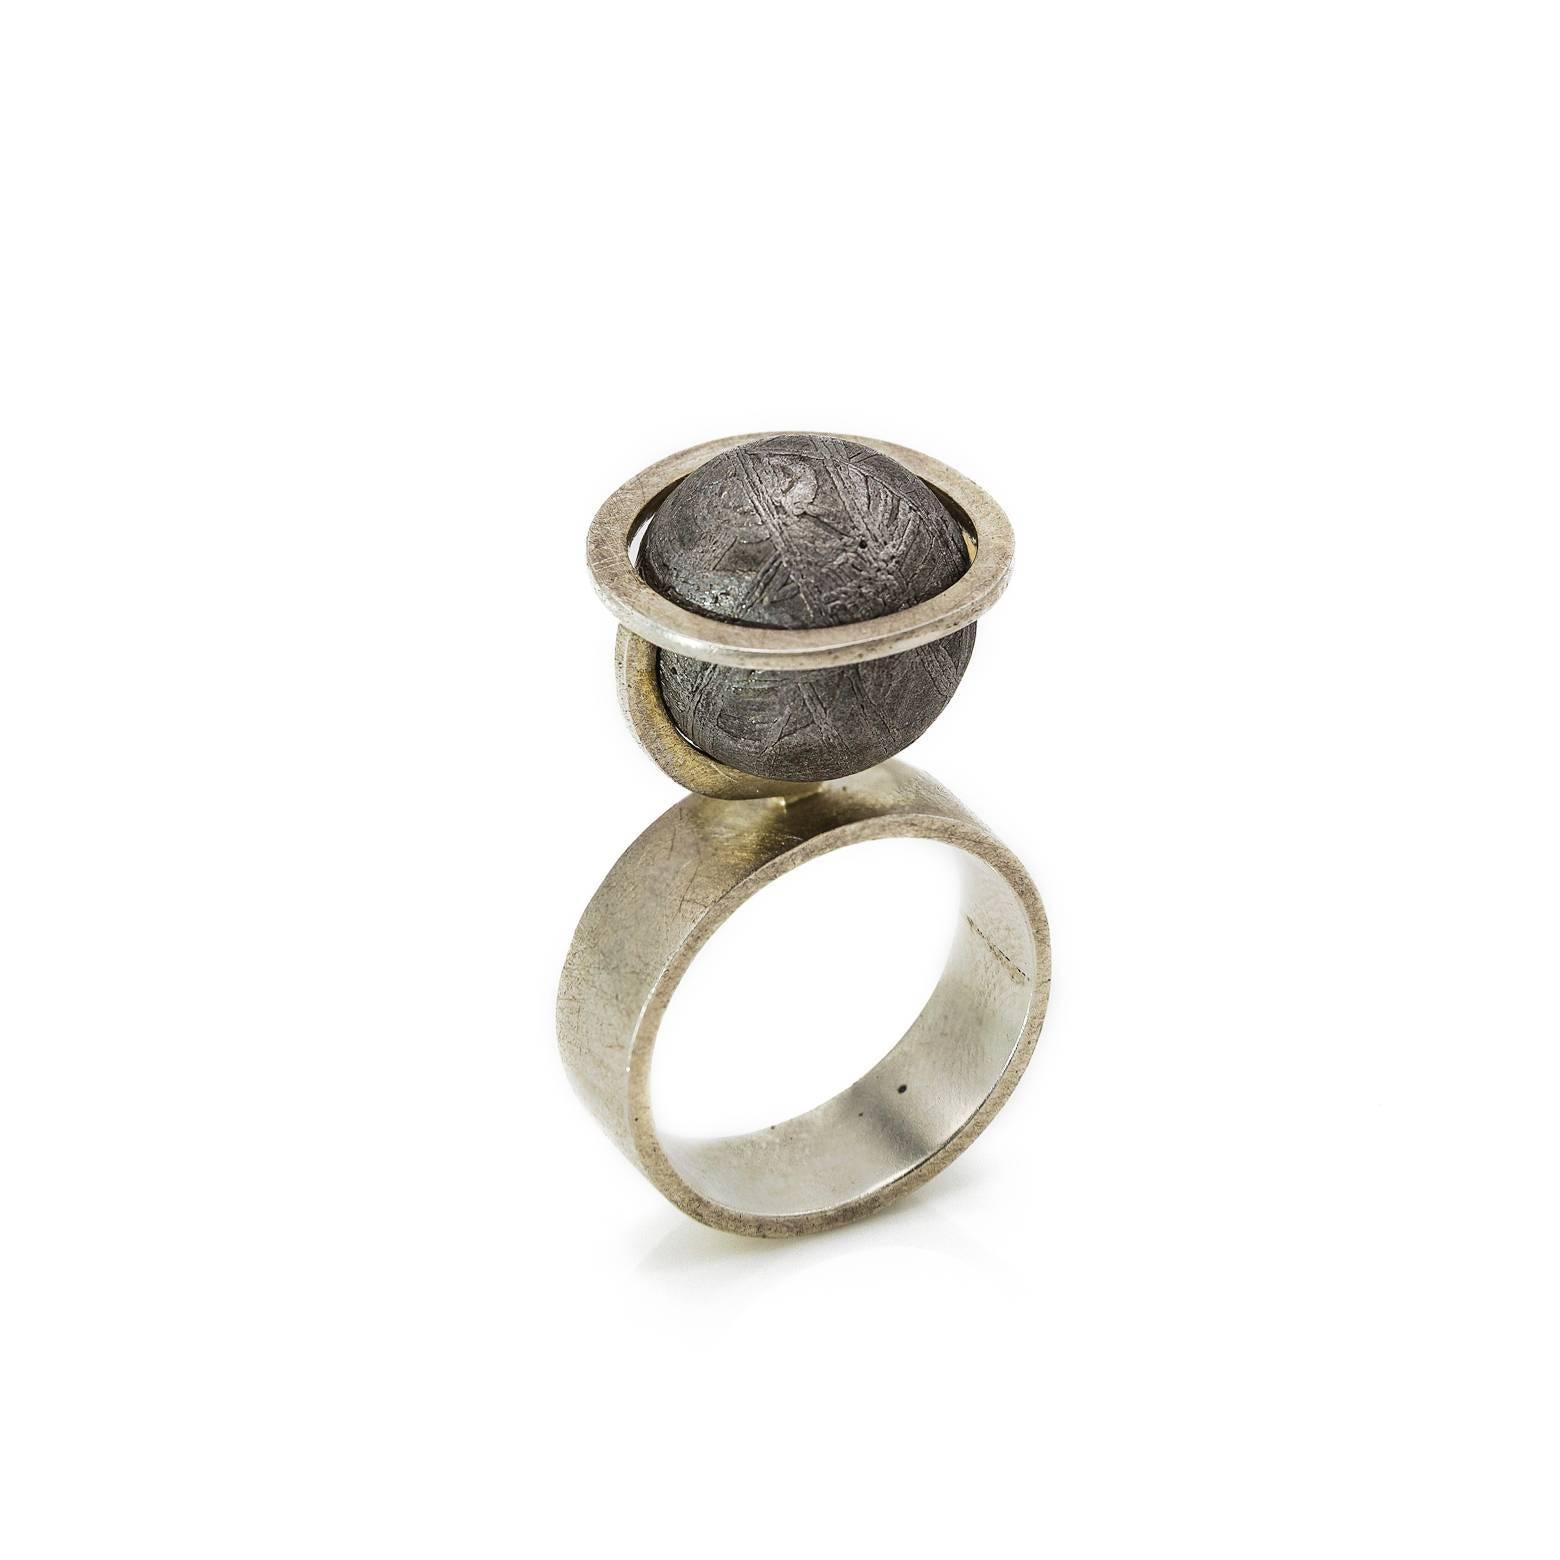 It's a literally out of this world meteorite ring with amazing patterns in this one of a kind sphere. An architecturally brilliant design completely unique in jewelry fashion. A strong and sturdy sterling silver ring with a bold lead-like grey